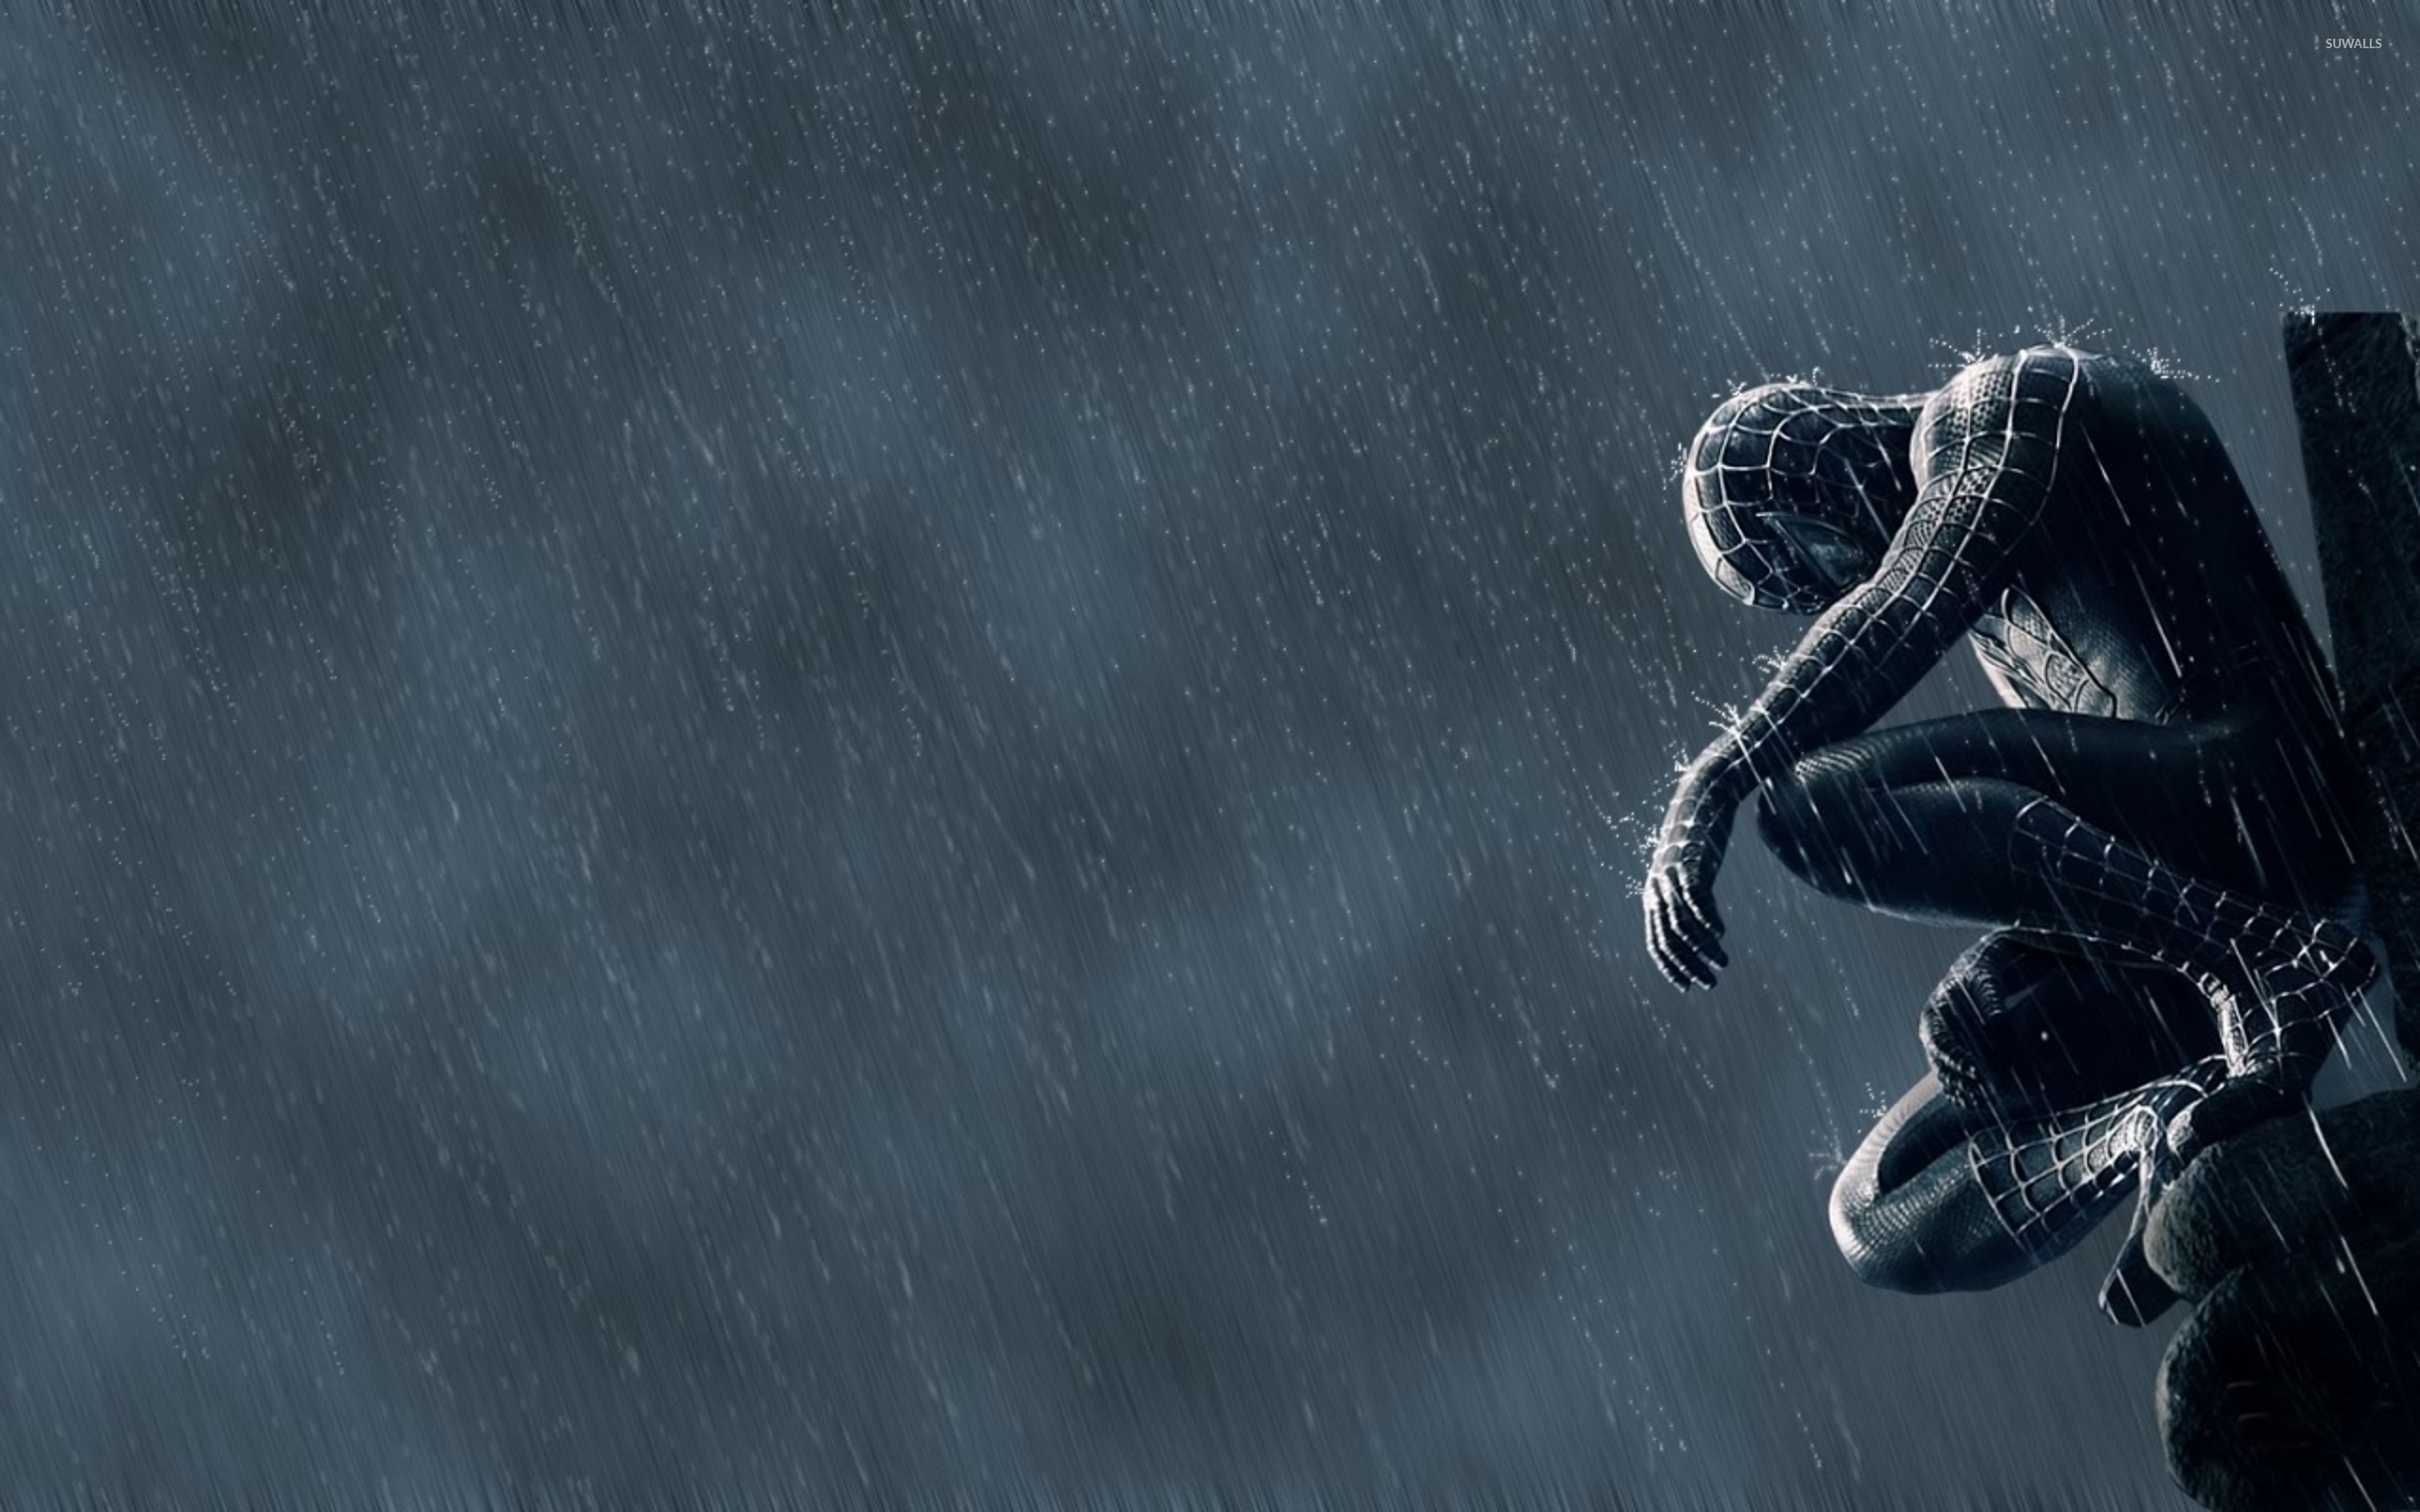 free Spider-Man 3 for iphone download